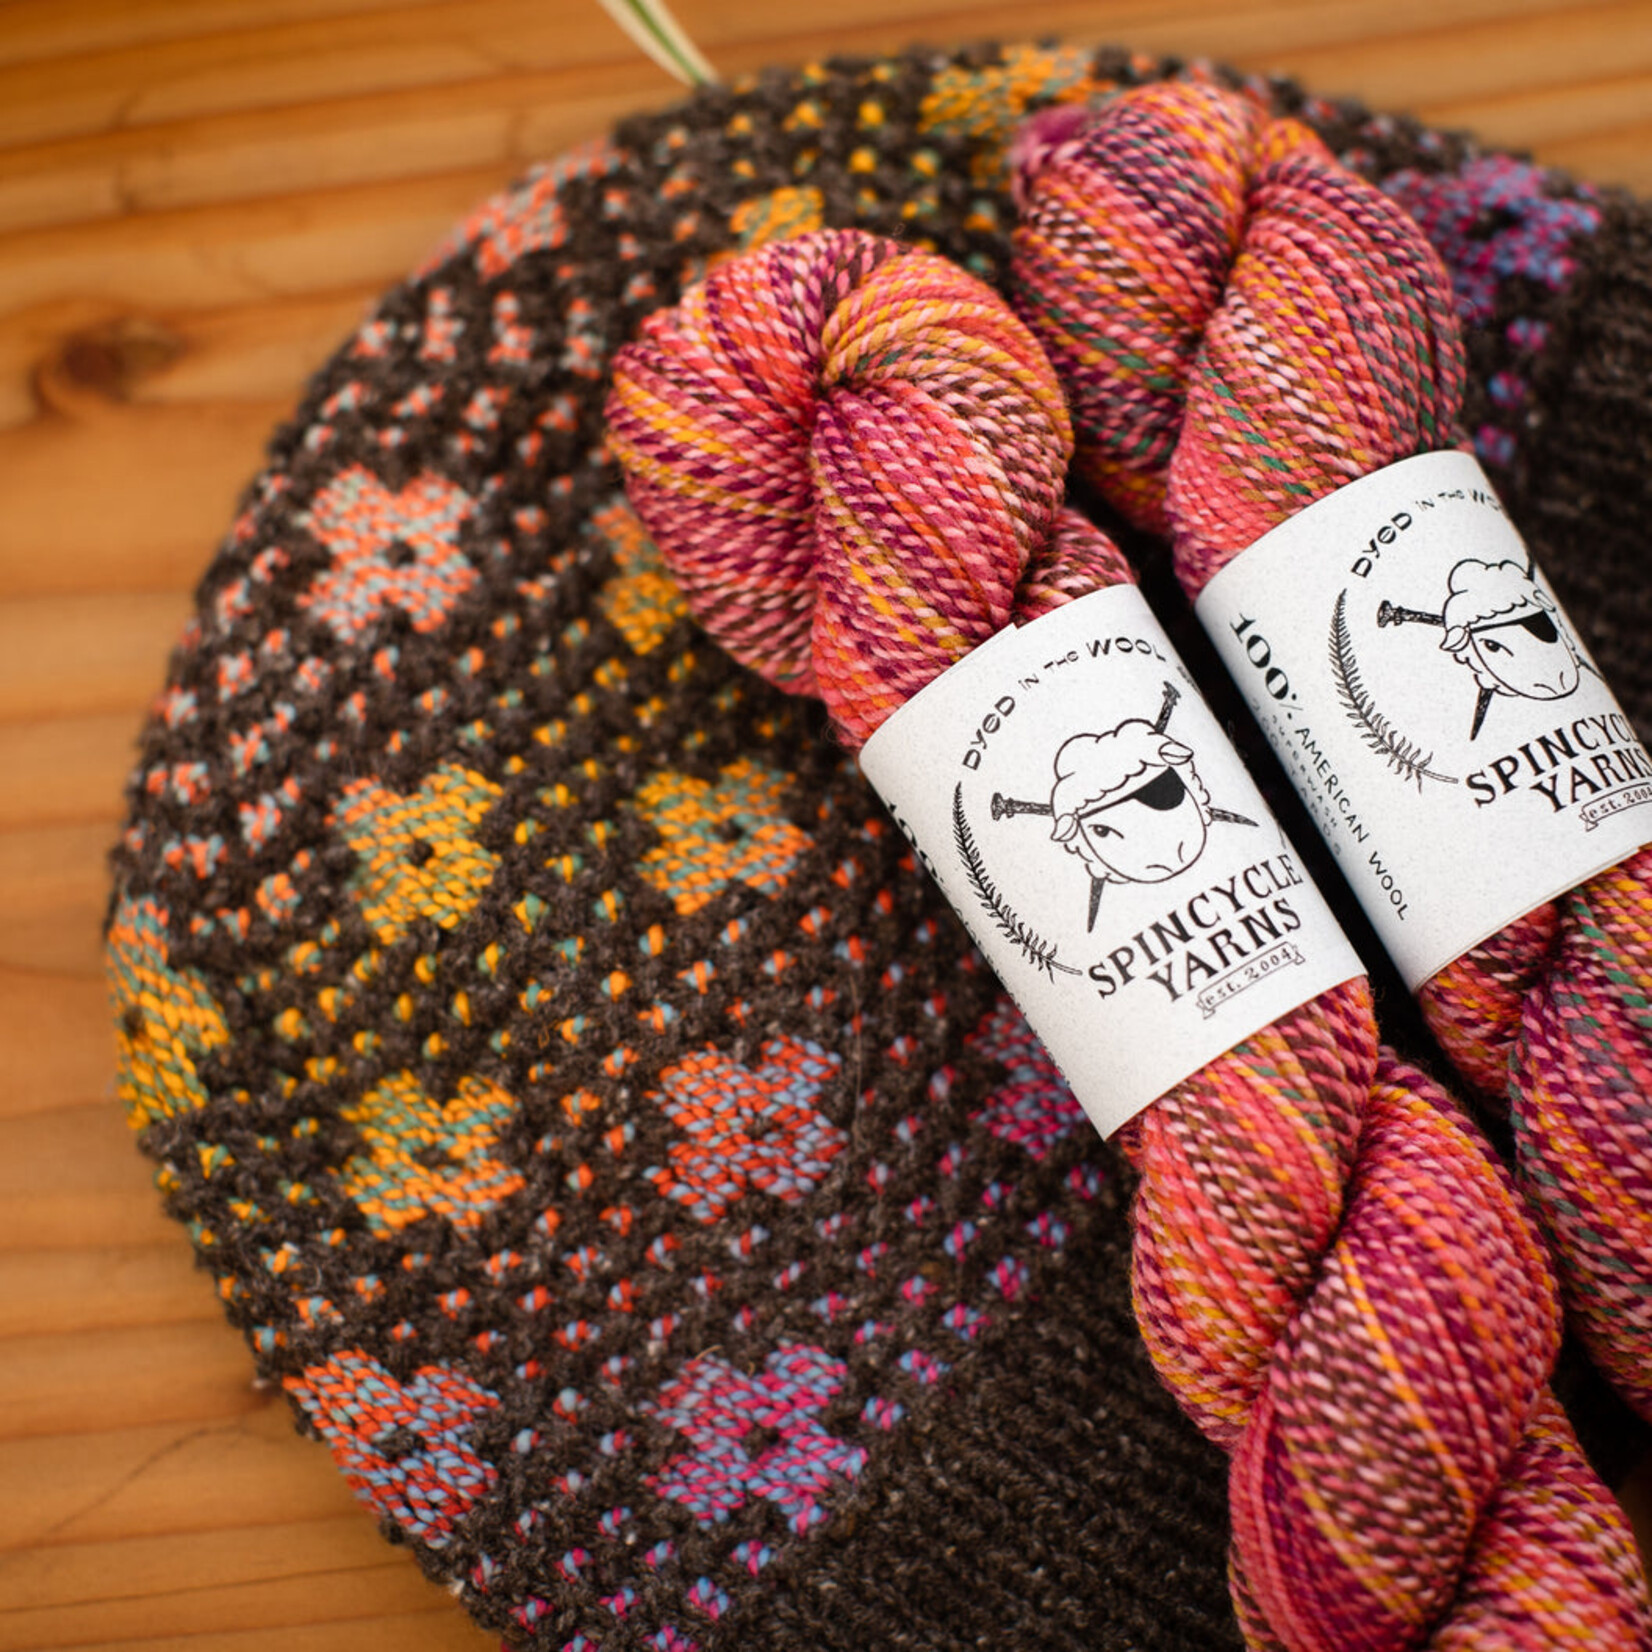 Spincycle Yarns Dyed in the Wool – A Yarn Story